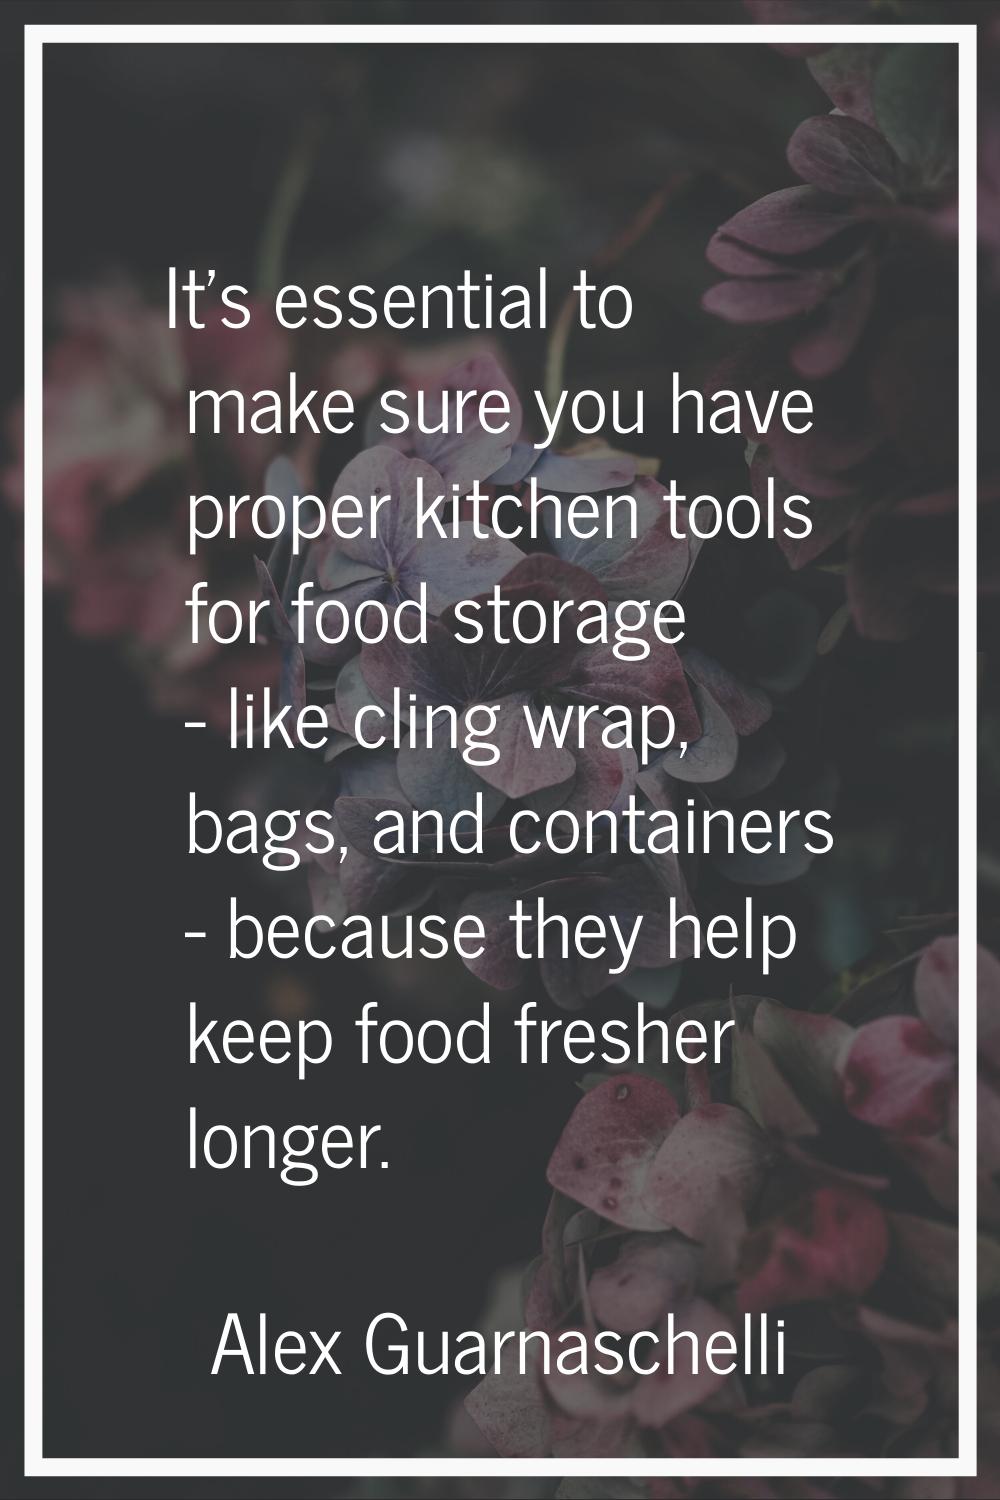 It's essential to make sure you have proper kitchen tools for food storage - like cling wrap, bags,